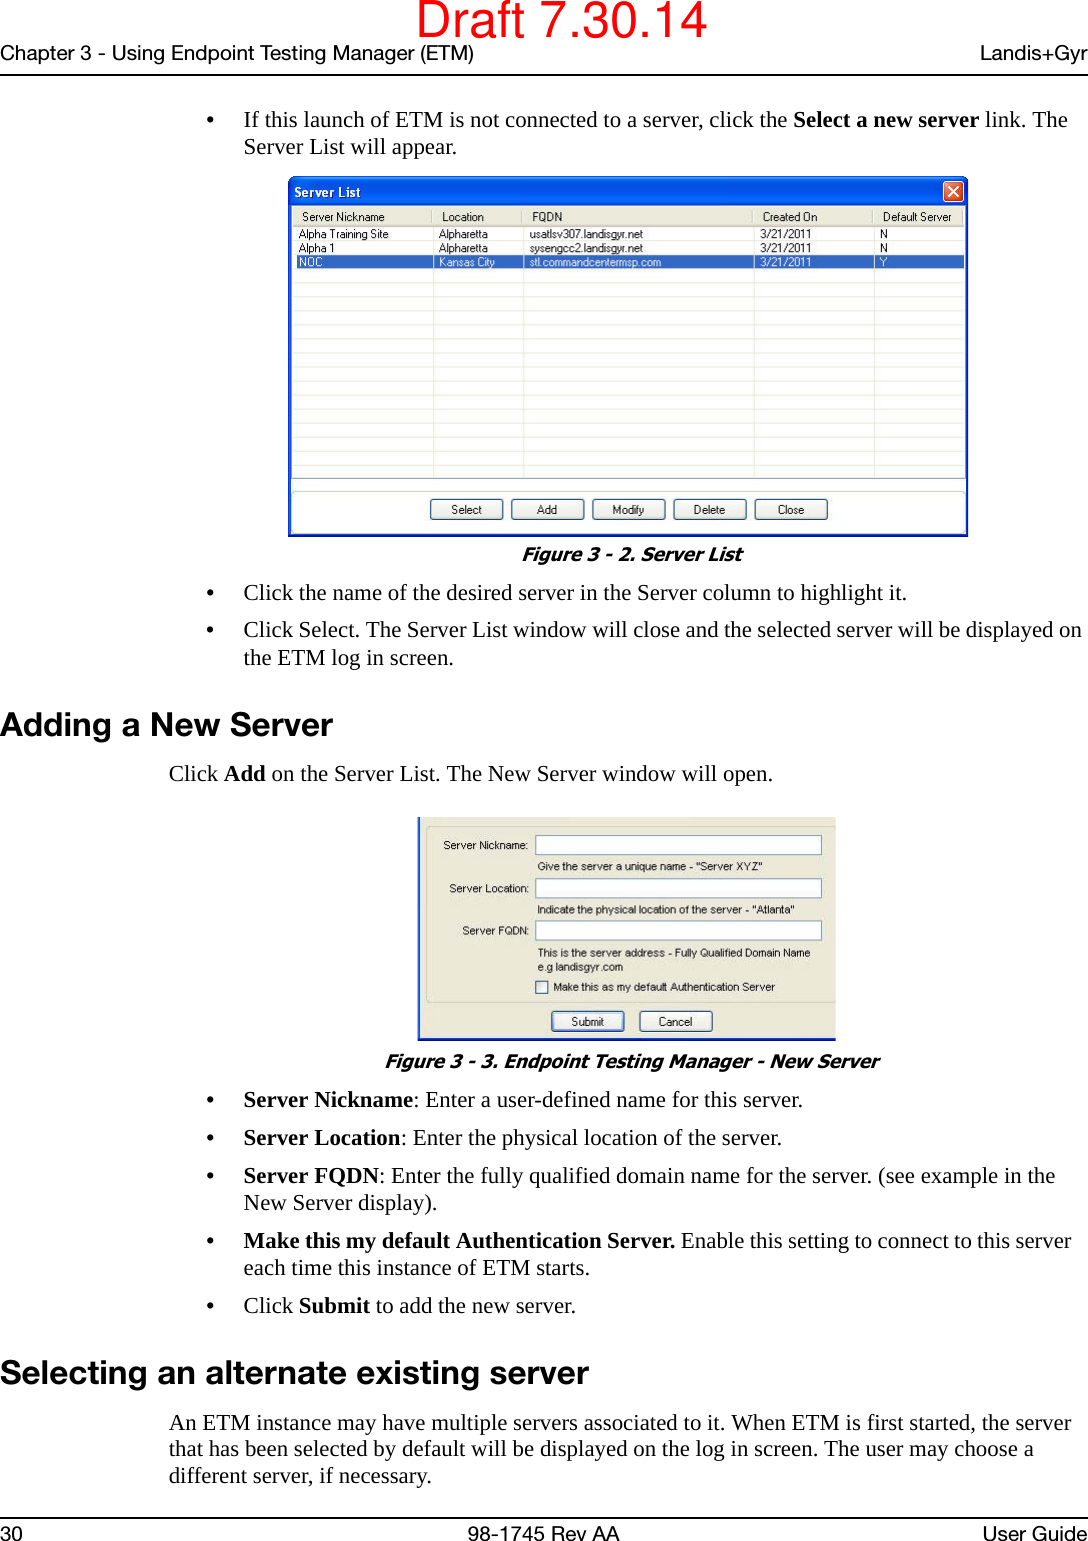 Chapter 3 - Using Endpoint Testing Manager (ETM) Landis+Gyr30 98-1745 Rev AA User Guide•If this launch of ETM is not connected to a server, click the Select a new server link. The Server List will appear. Figure 3 - 2. Server List•Click the name of the desired server in the Server column to highlight it.•Click Select. The Server List window will close and the selected server will be displayed on the ETM log in screen.Adding a New ServerClick Add on the Server List. The New Server window will open. Figure 3 - 3. Endpoint Testing Manager - New Server• Server Nickname: Enter a user-defined name for this server.• Server Location: Enter the physical location of the server.• Server FQDN: Enter the fully qualified domain name for the server. (see example in the New Server display). • Make this my default Authentication Server. Enable this setting to connect to this server   each time this instance of ETM starts.•Click Submit to add the new server.Selecting an alternate existing serverAn ETM instance may have multiple servers associated to it. When ETM is first started, the server that has been selected by default will be displayed on the log in screen. The user may choose a different server, if necessary.Draft 7.30.14